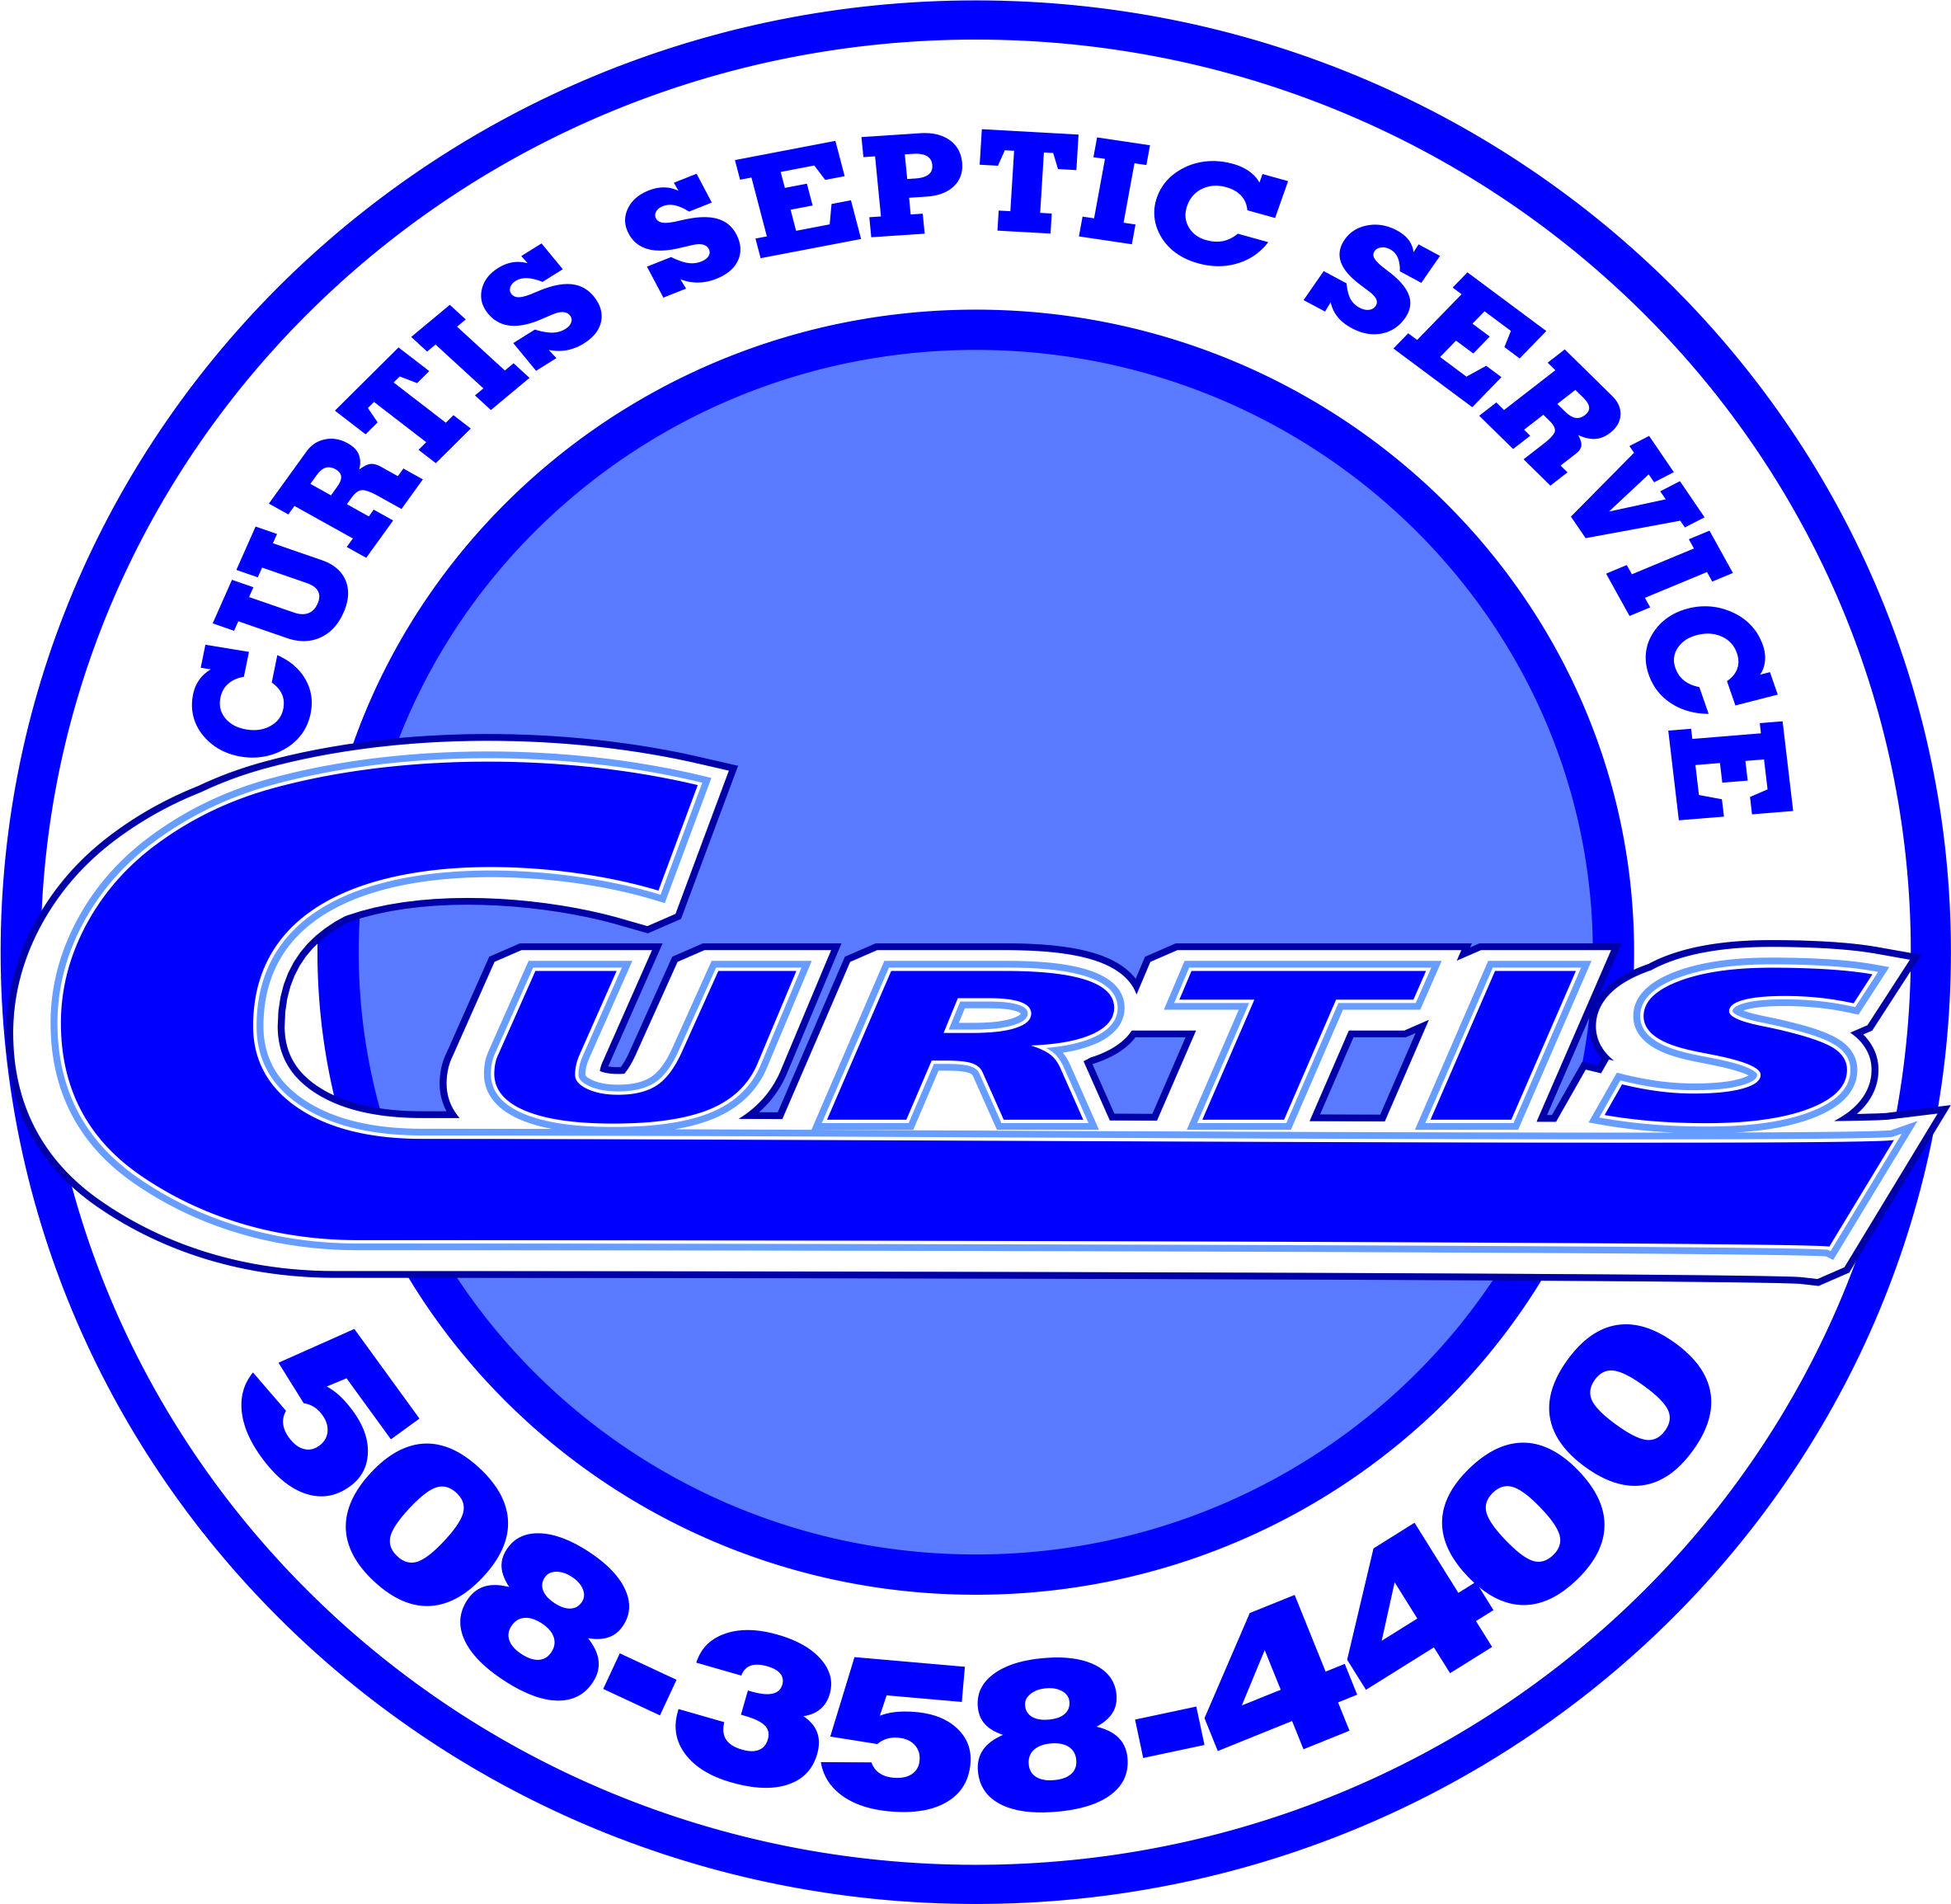 Septic system inspectors in Barre, MA.